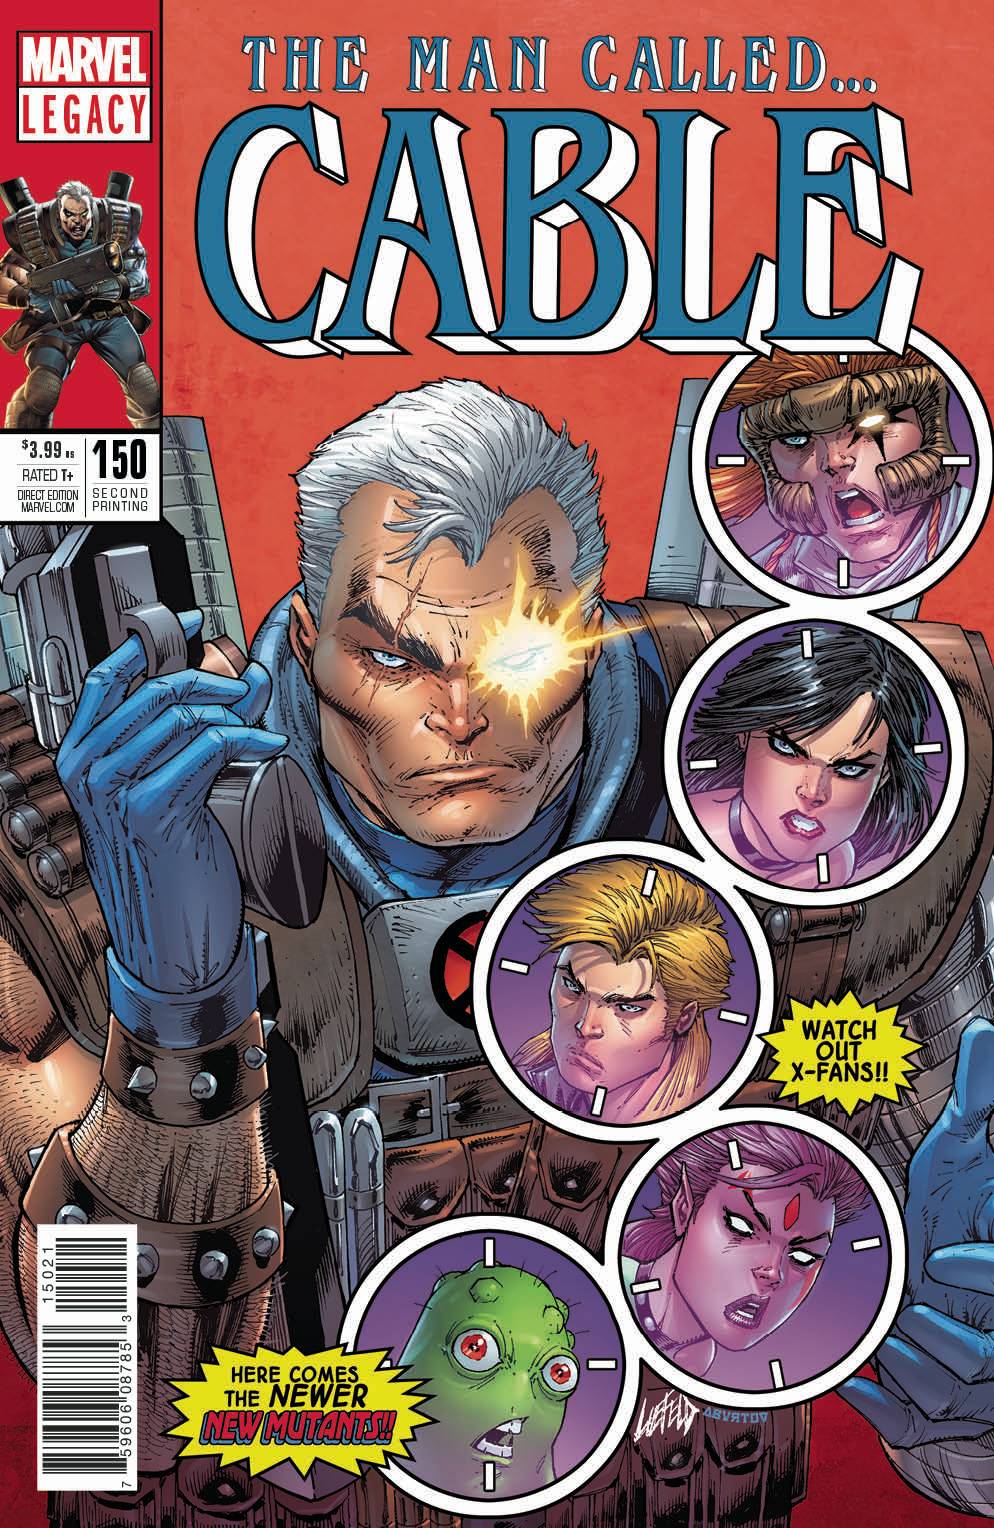 CABLE#150